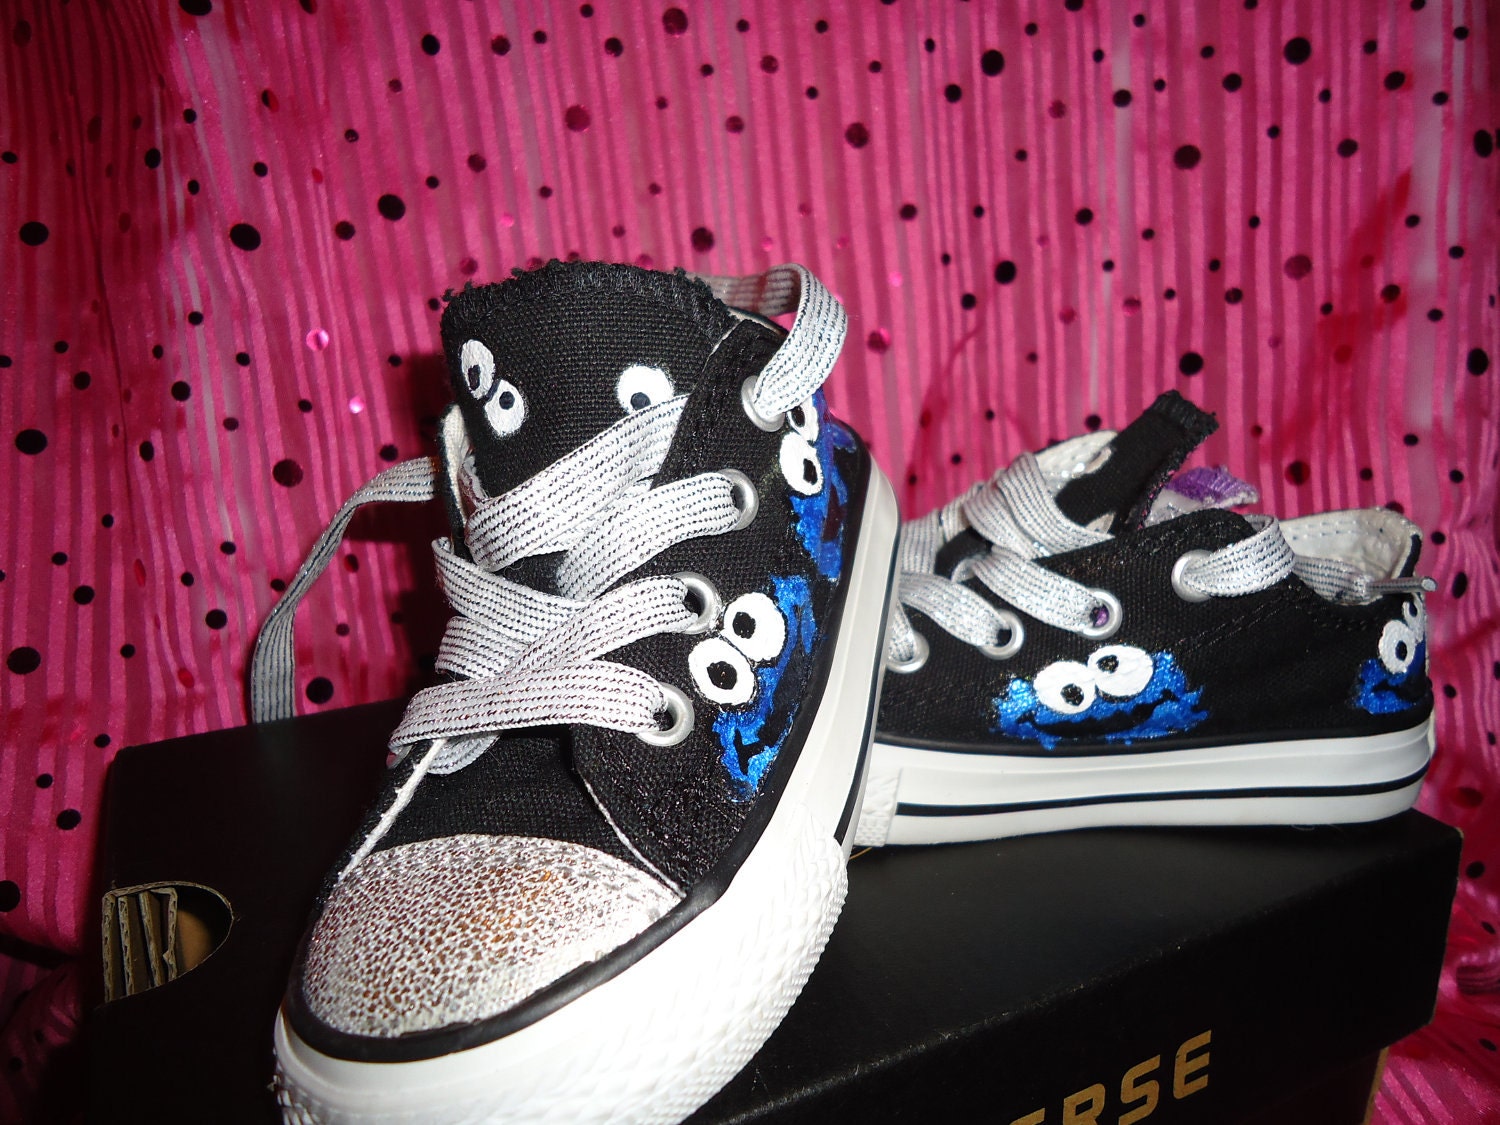 Cookie Monster Hand Painted Converse Toddler Shoes size 6